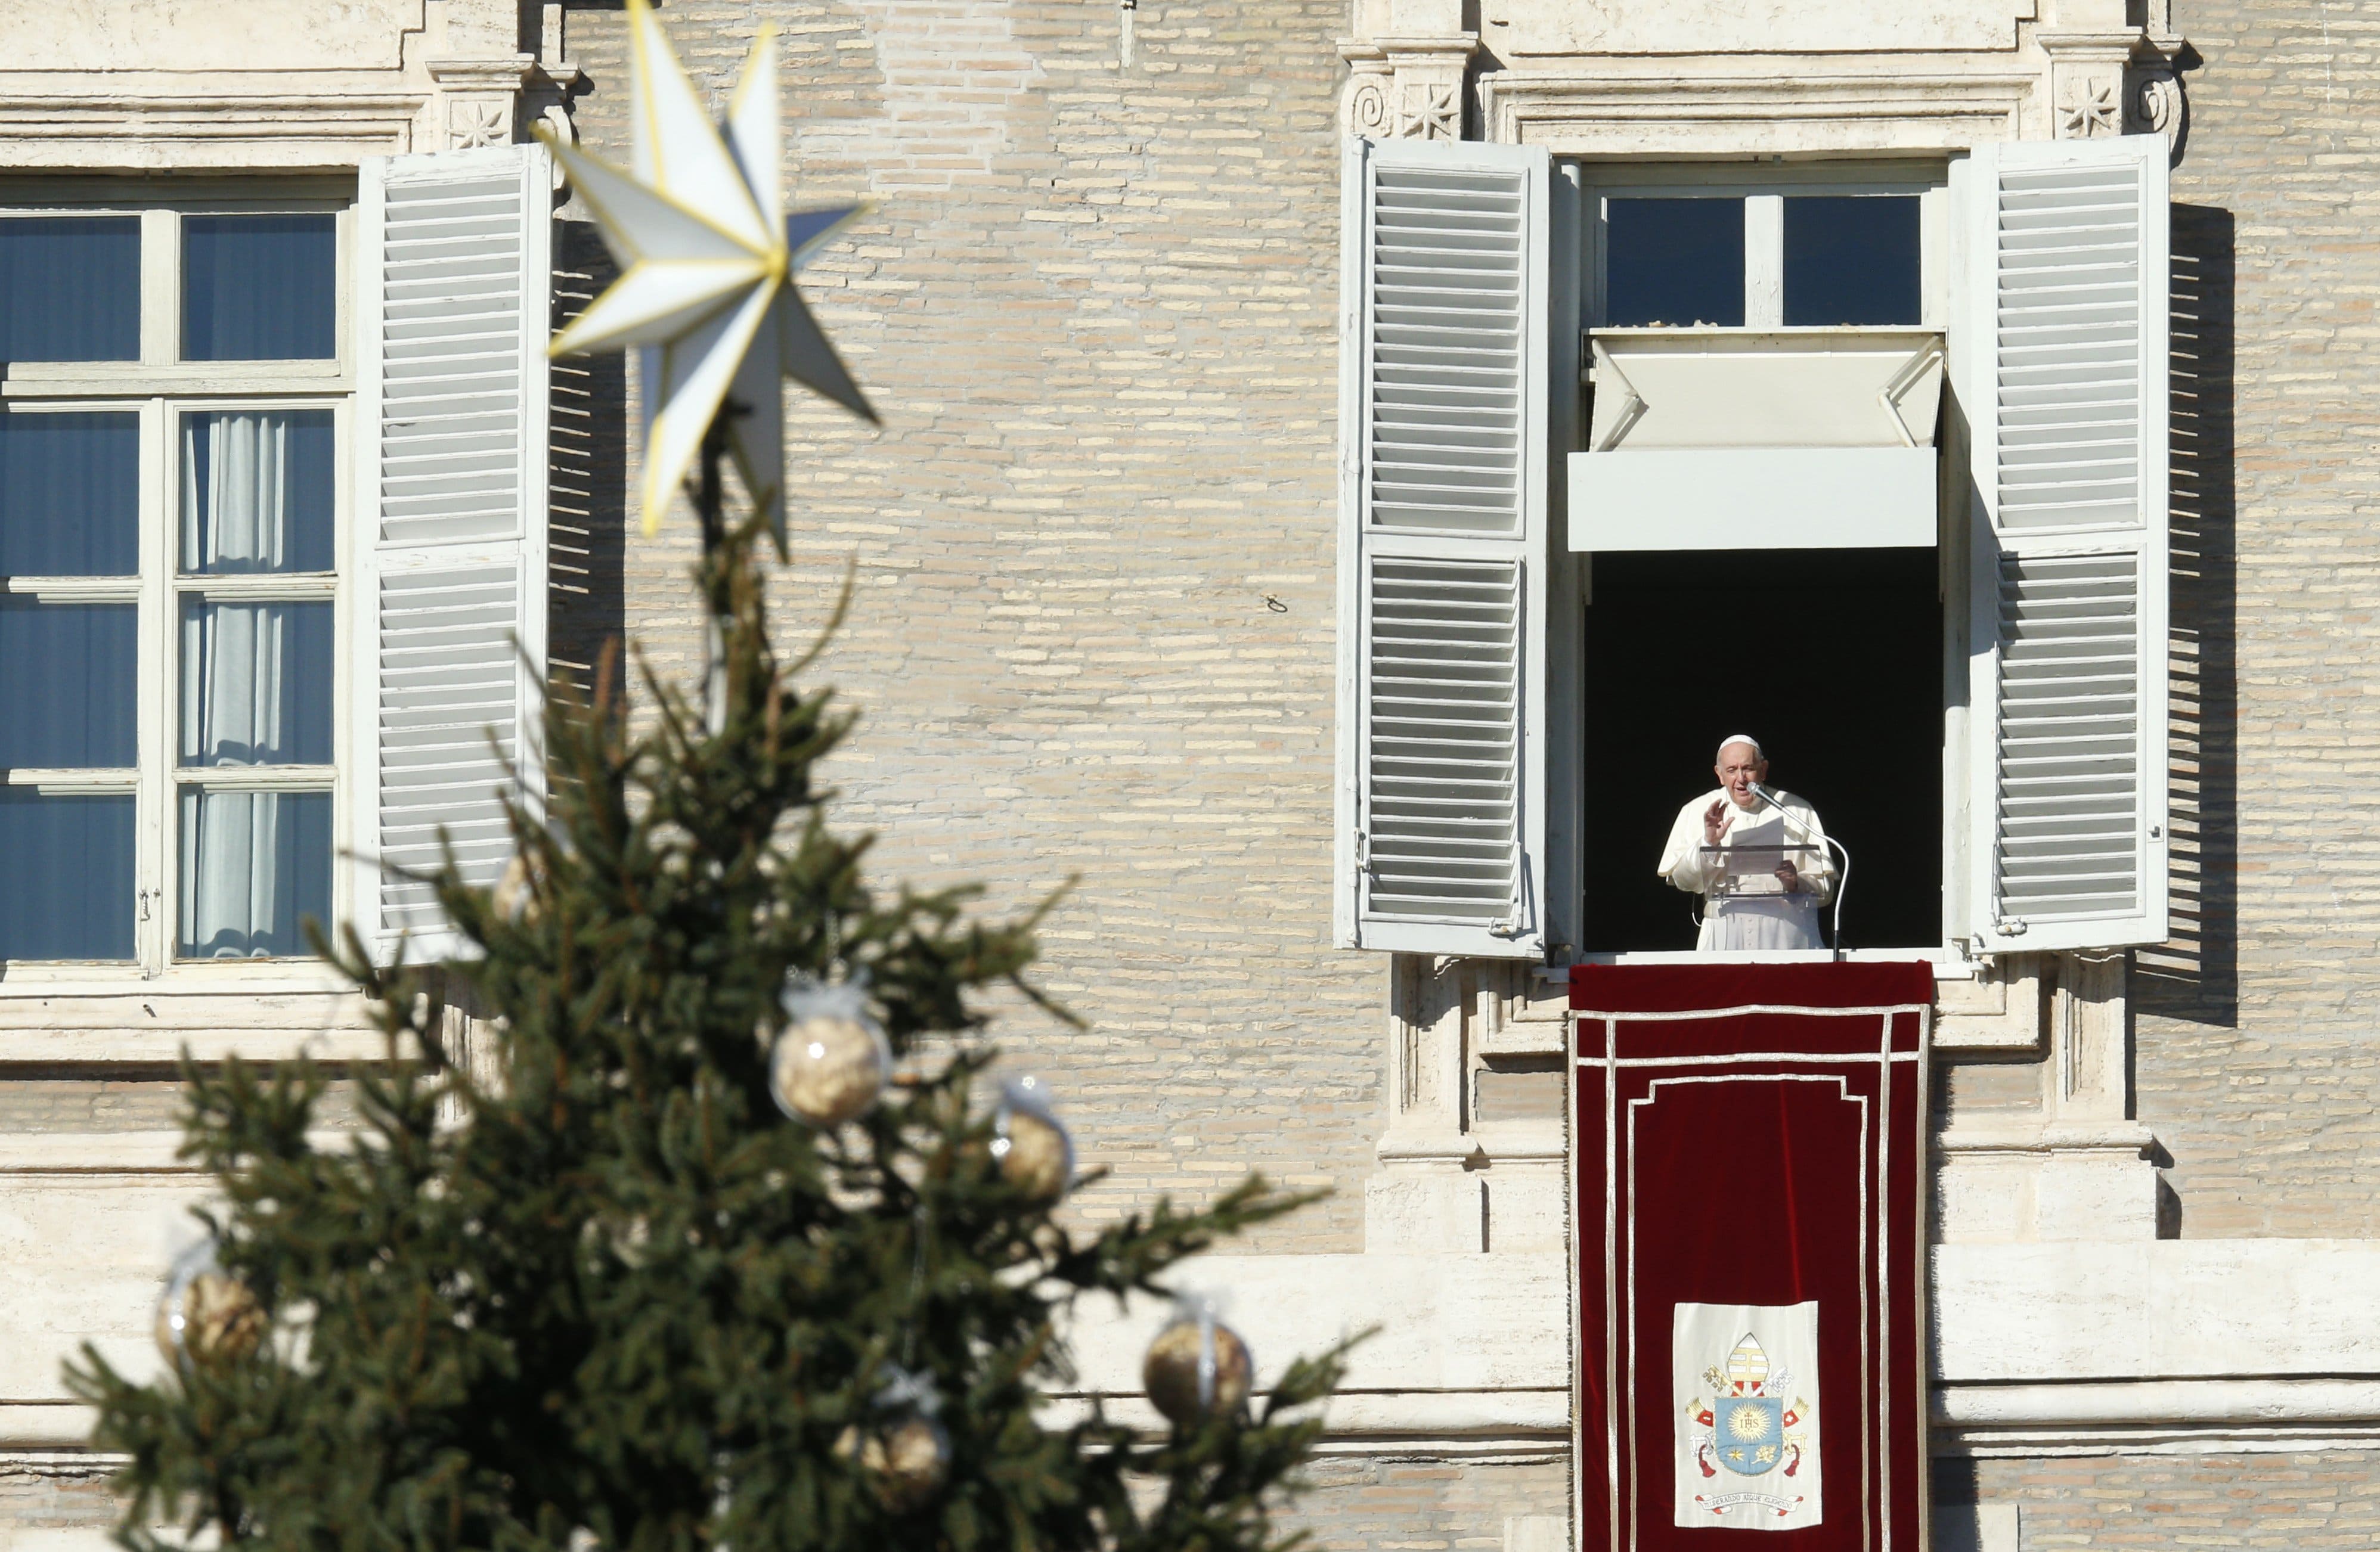 The Christmas tree is seen as Pope Francis leads the Angelus from the window of his studio overlooking St. Peter's Square at the Vatican Dec. 19, 2021. (CNS photo/Paul Haring)